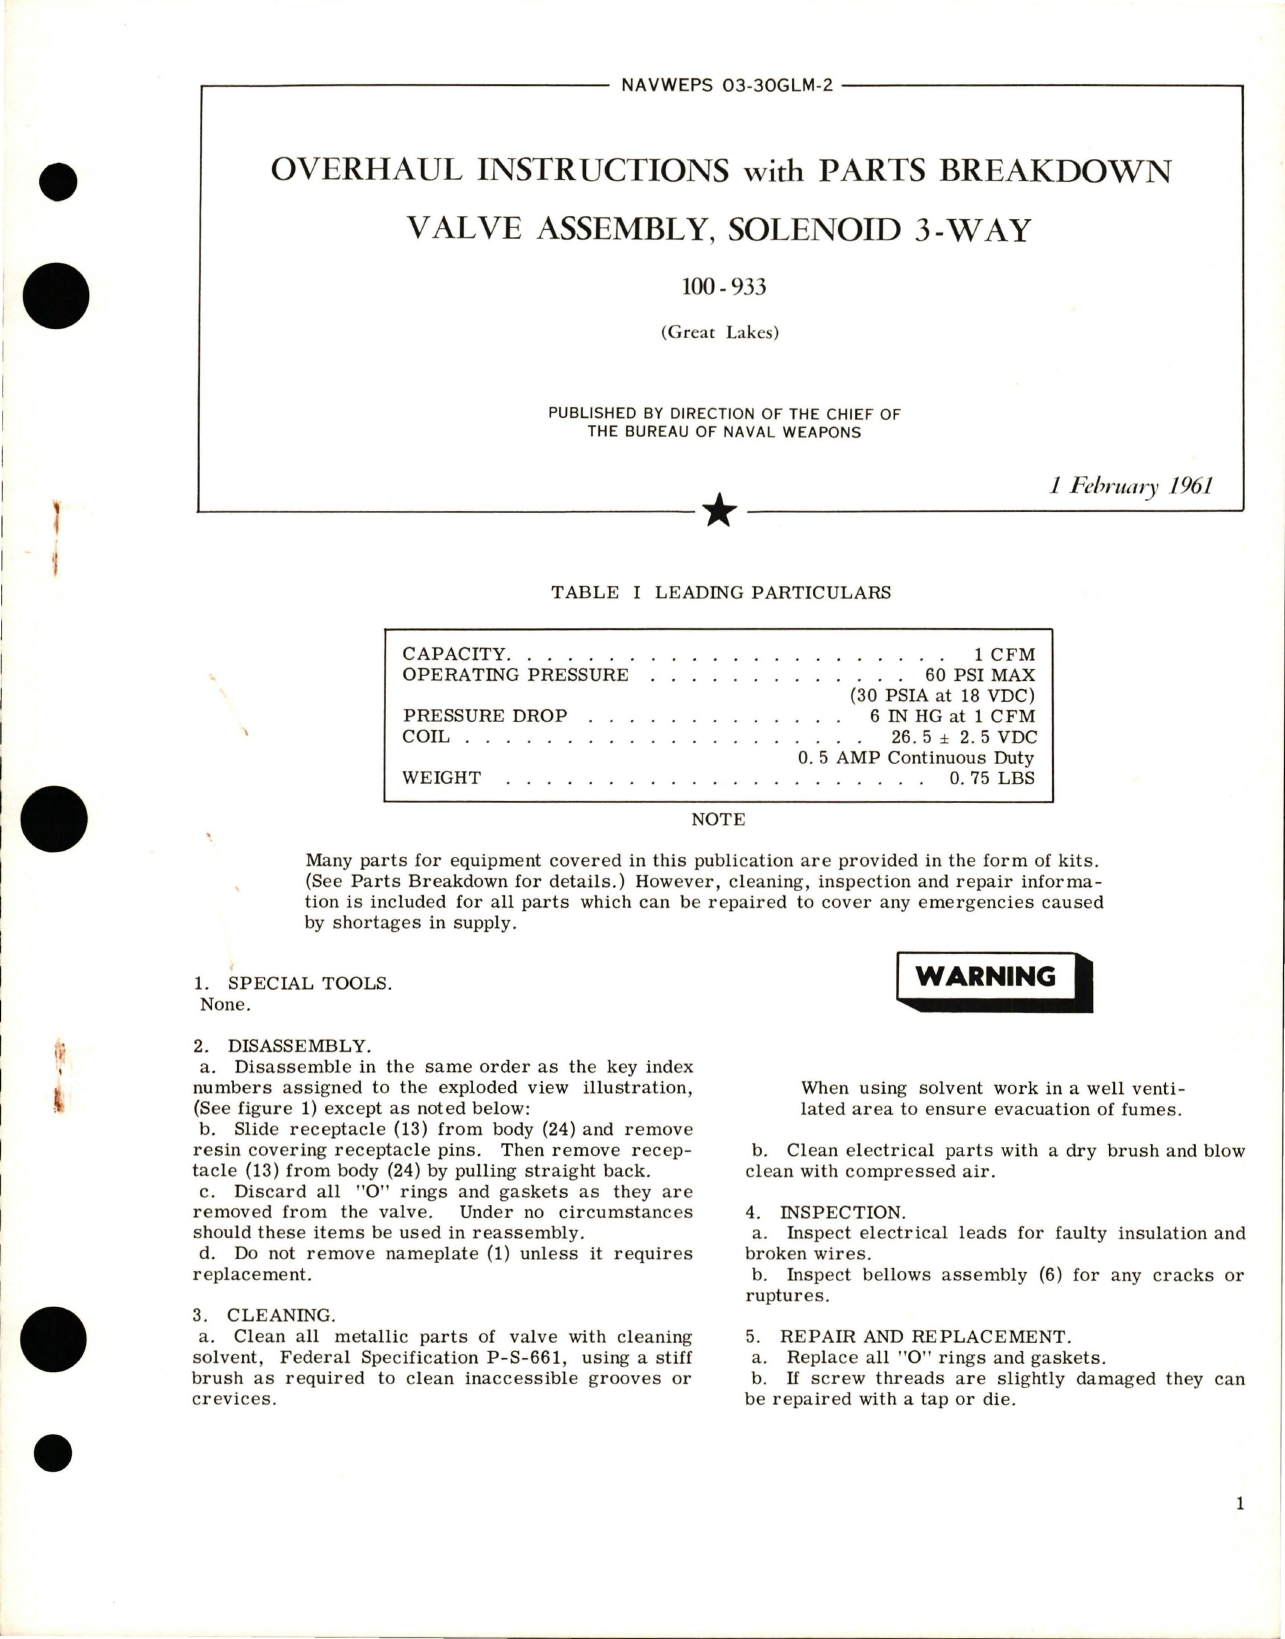 Sample page 1 from AirCorps Library document: Overhaul Instructions with Parts Breakdown for Solenoid 3-Way Valve Assembly - 100-933 